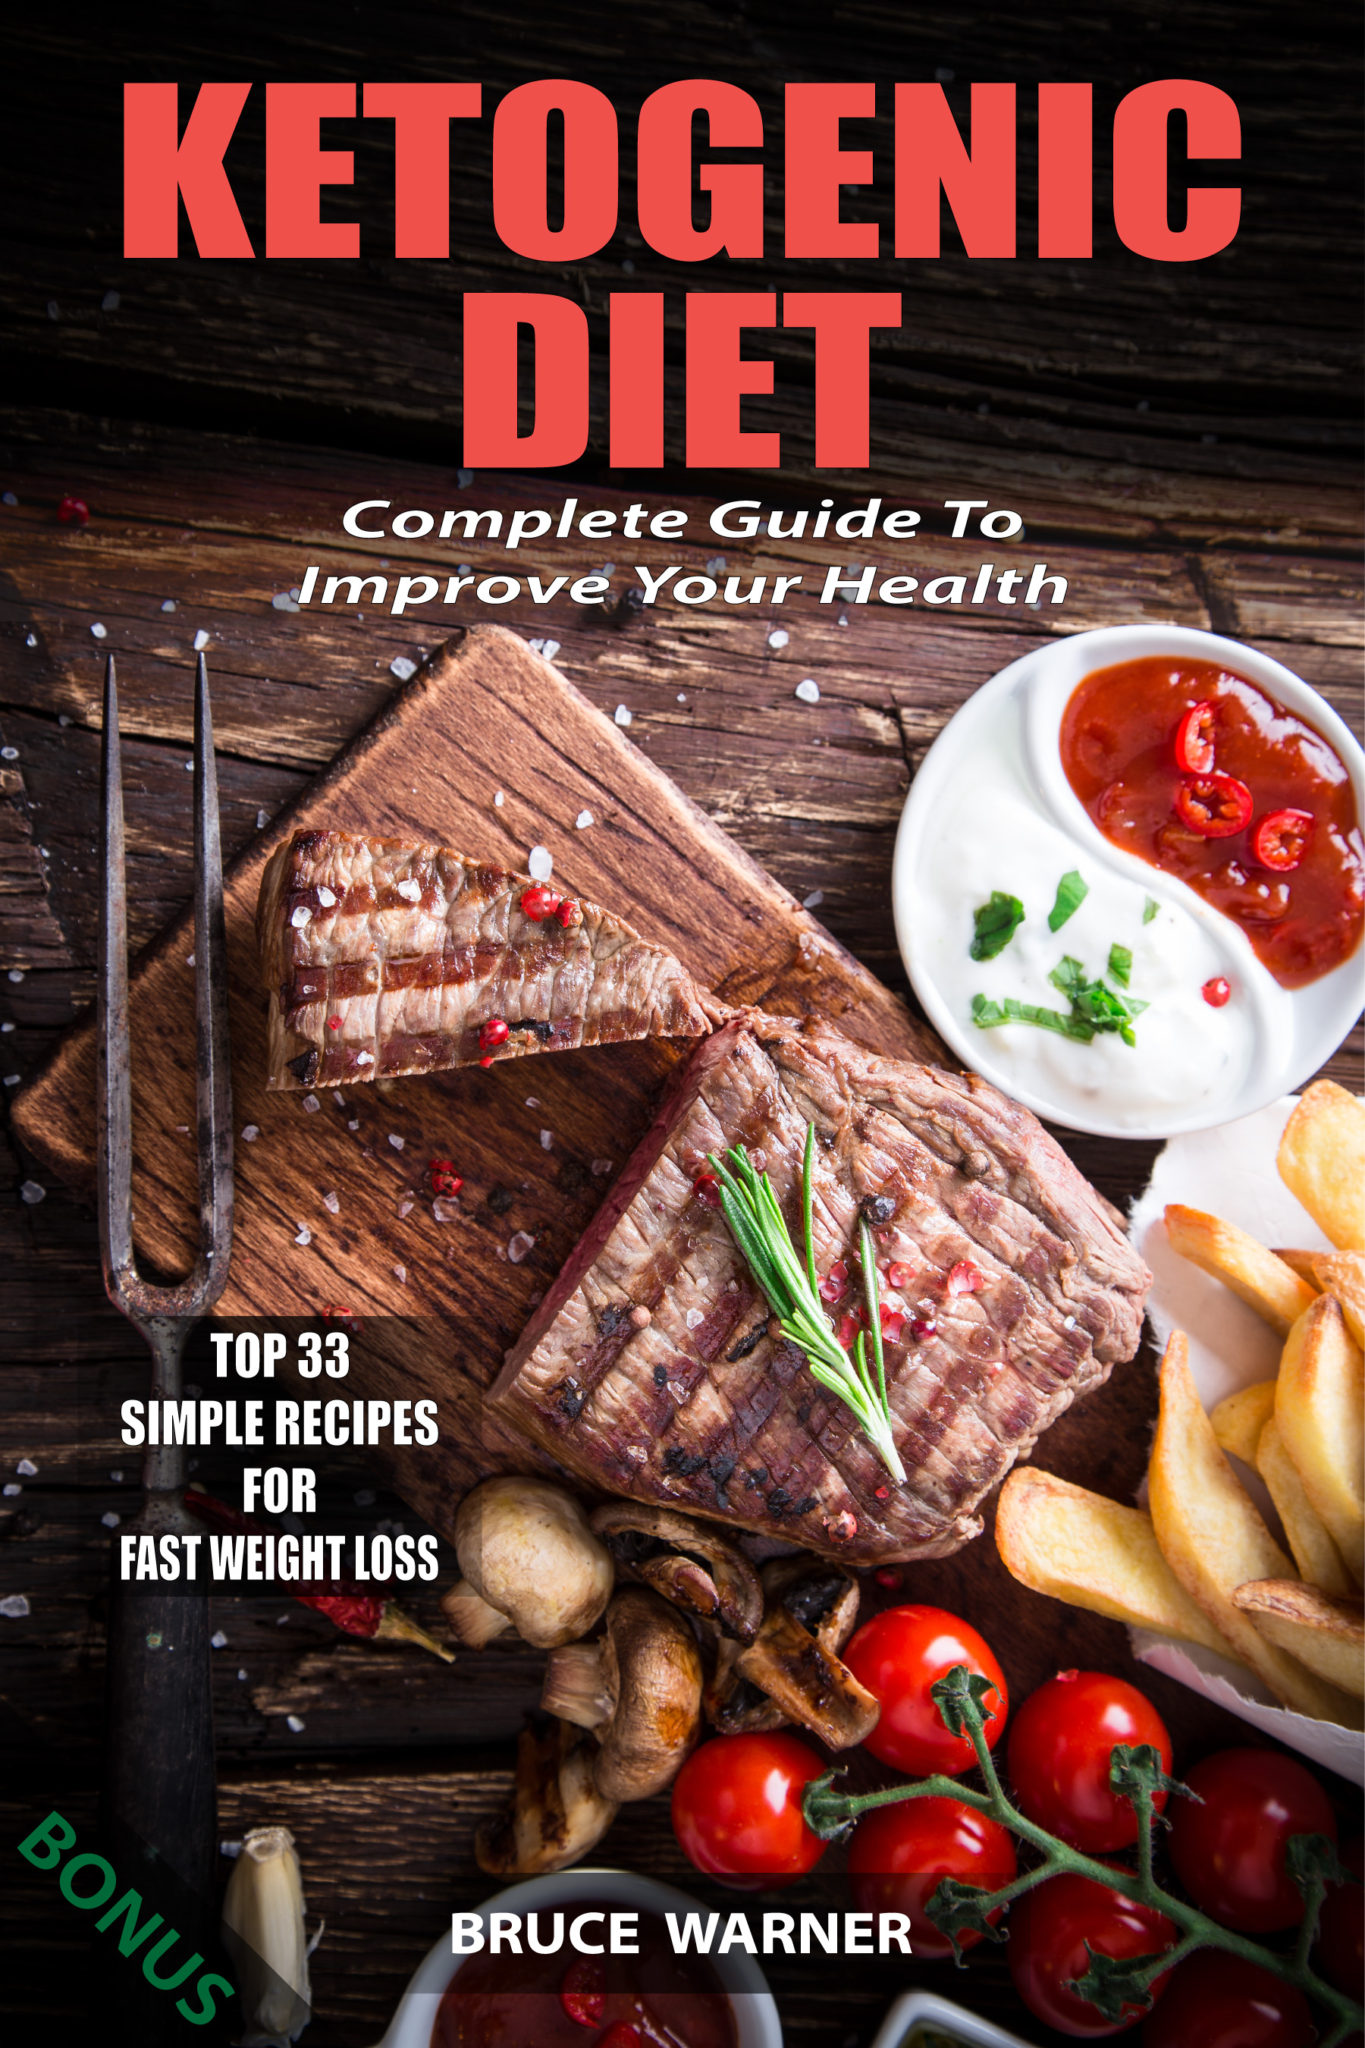 FREE: Ketogenic Diet: Complete Guide To Improve Your Health: Top 33 Simple Recipes For Fast Weight Loss by Bruce Warner